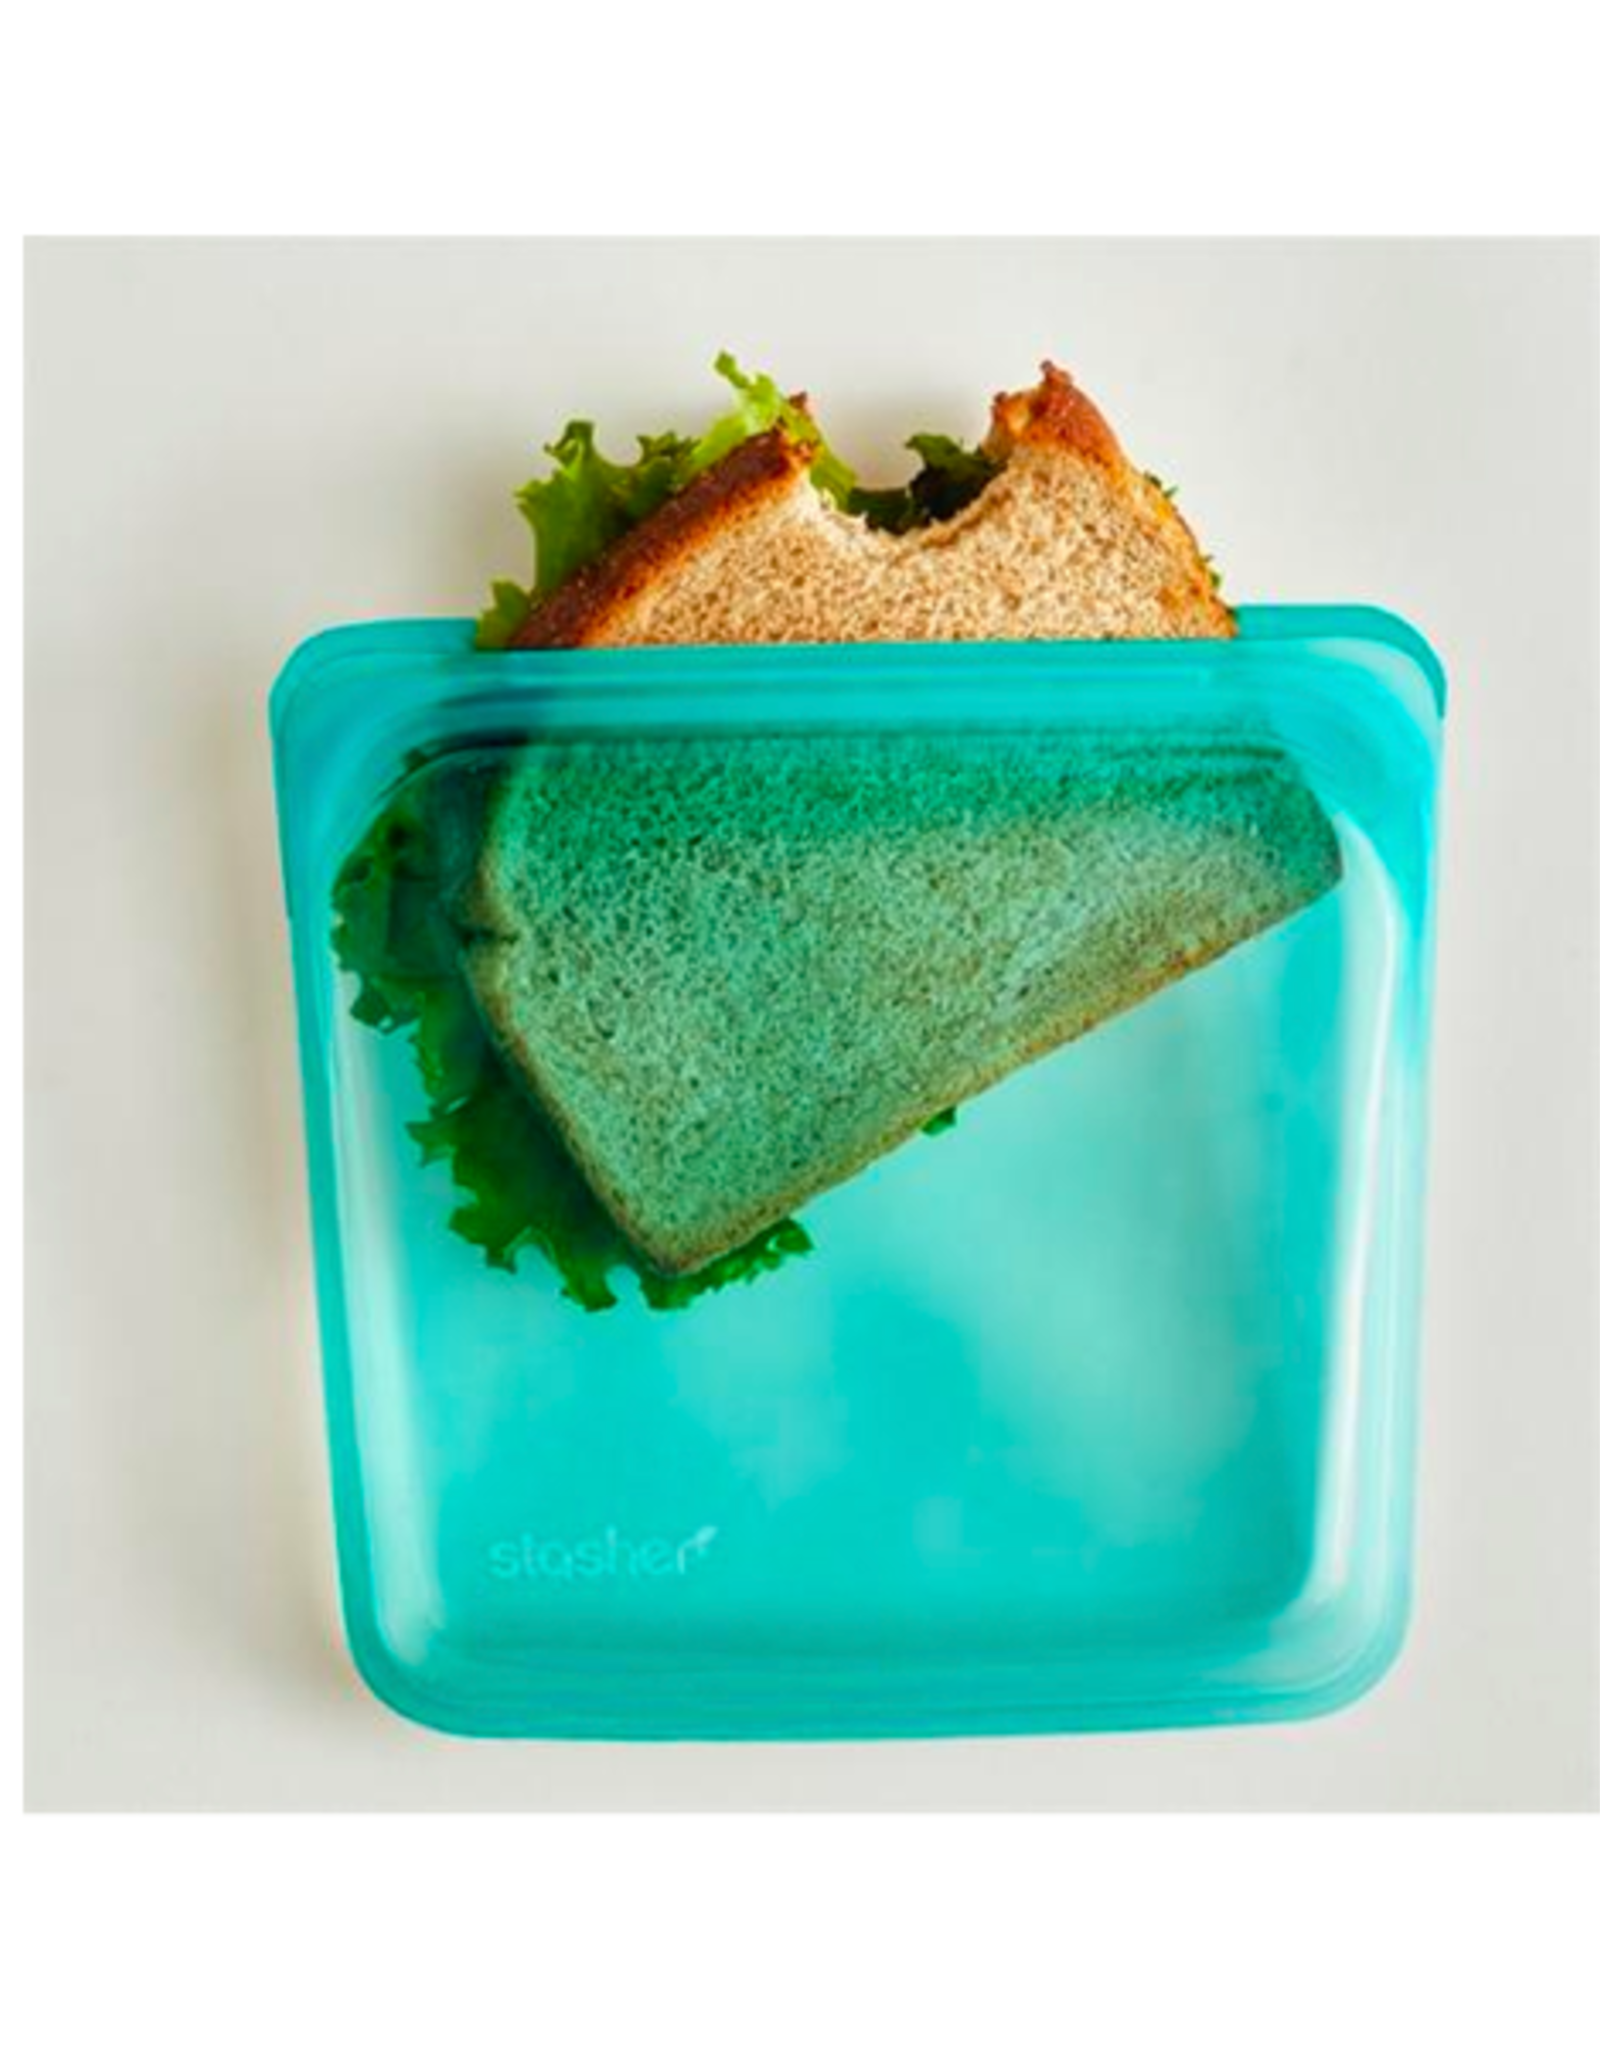 TIMCo DCO - Stasher Sandwich Bag / Turquoise Silicone